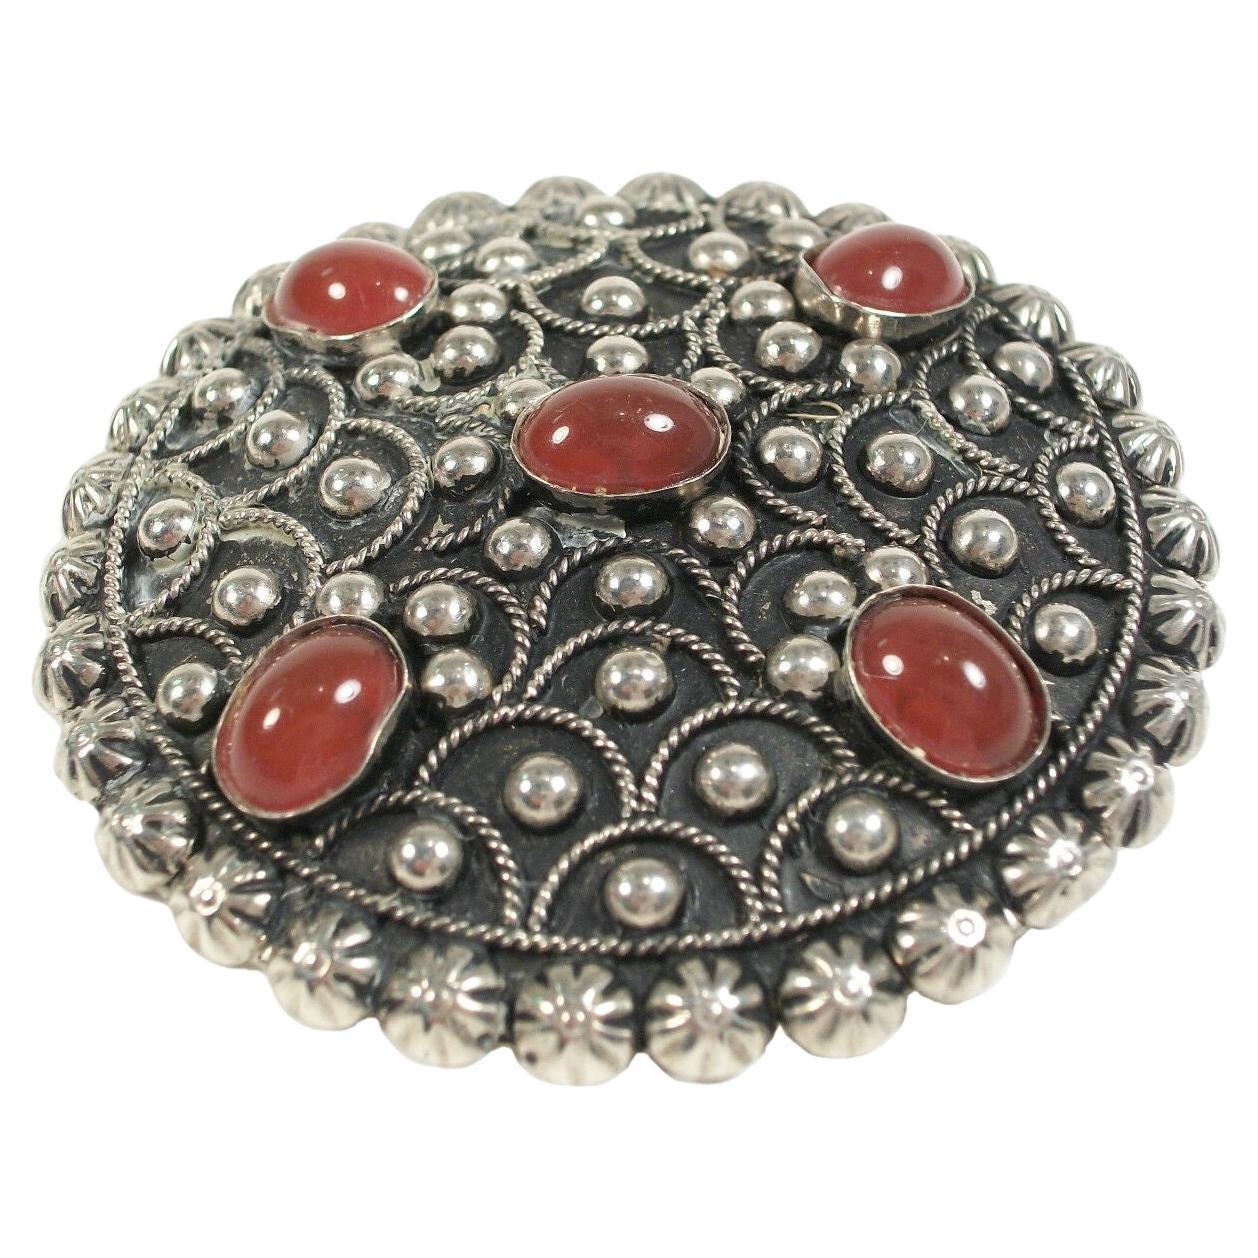 Vintage Silver Tone Brooch/Pendant with Faux Carnelian - Italy - Circa 1960's